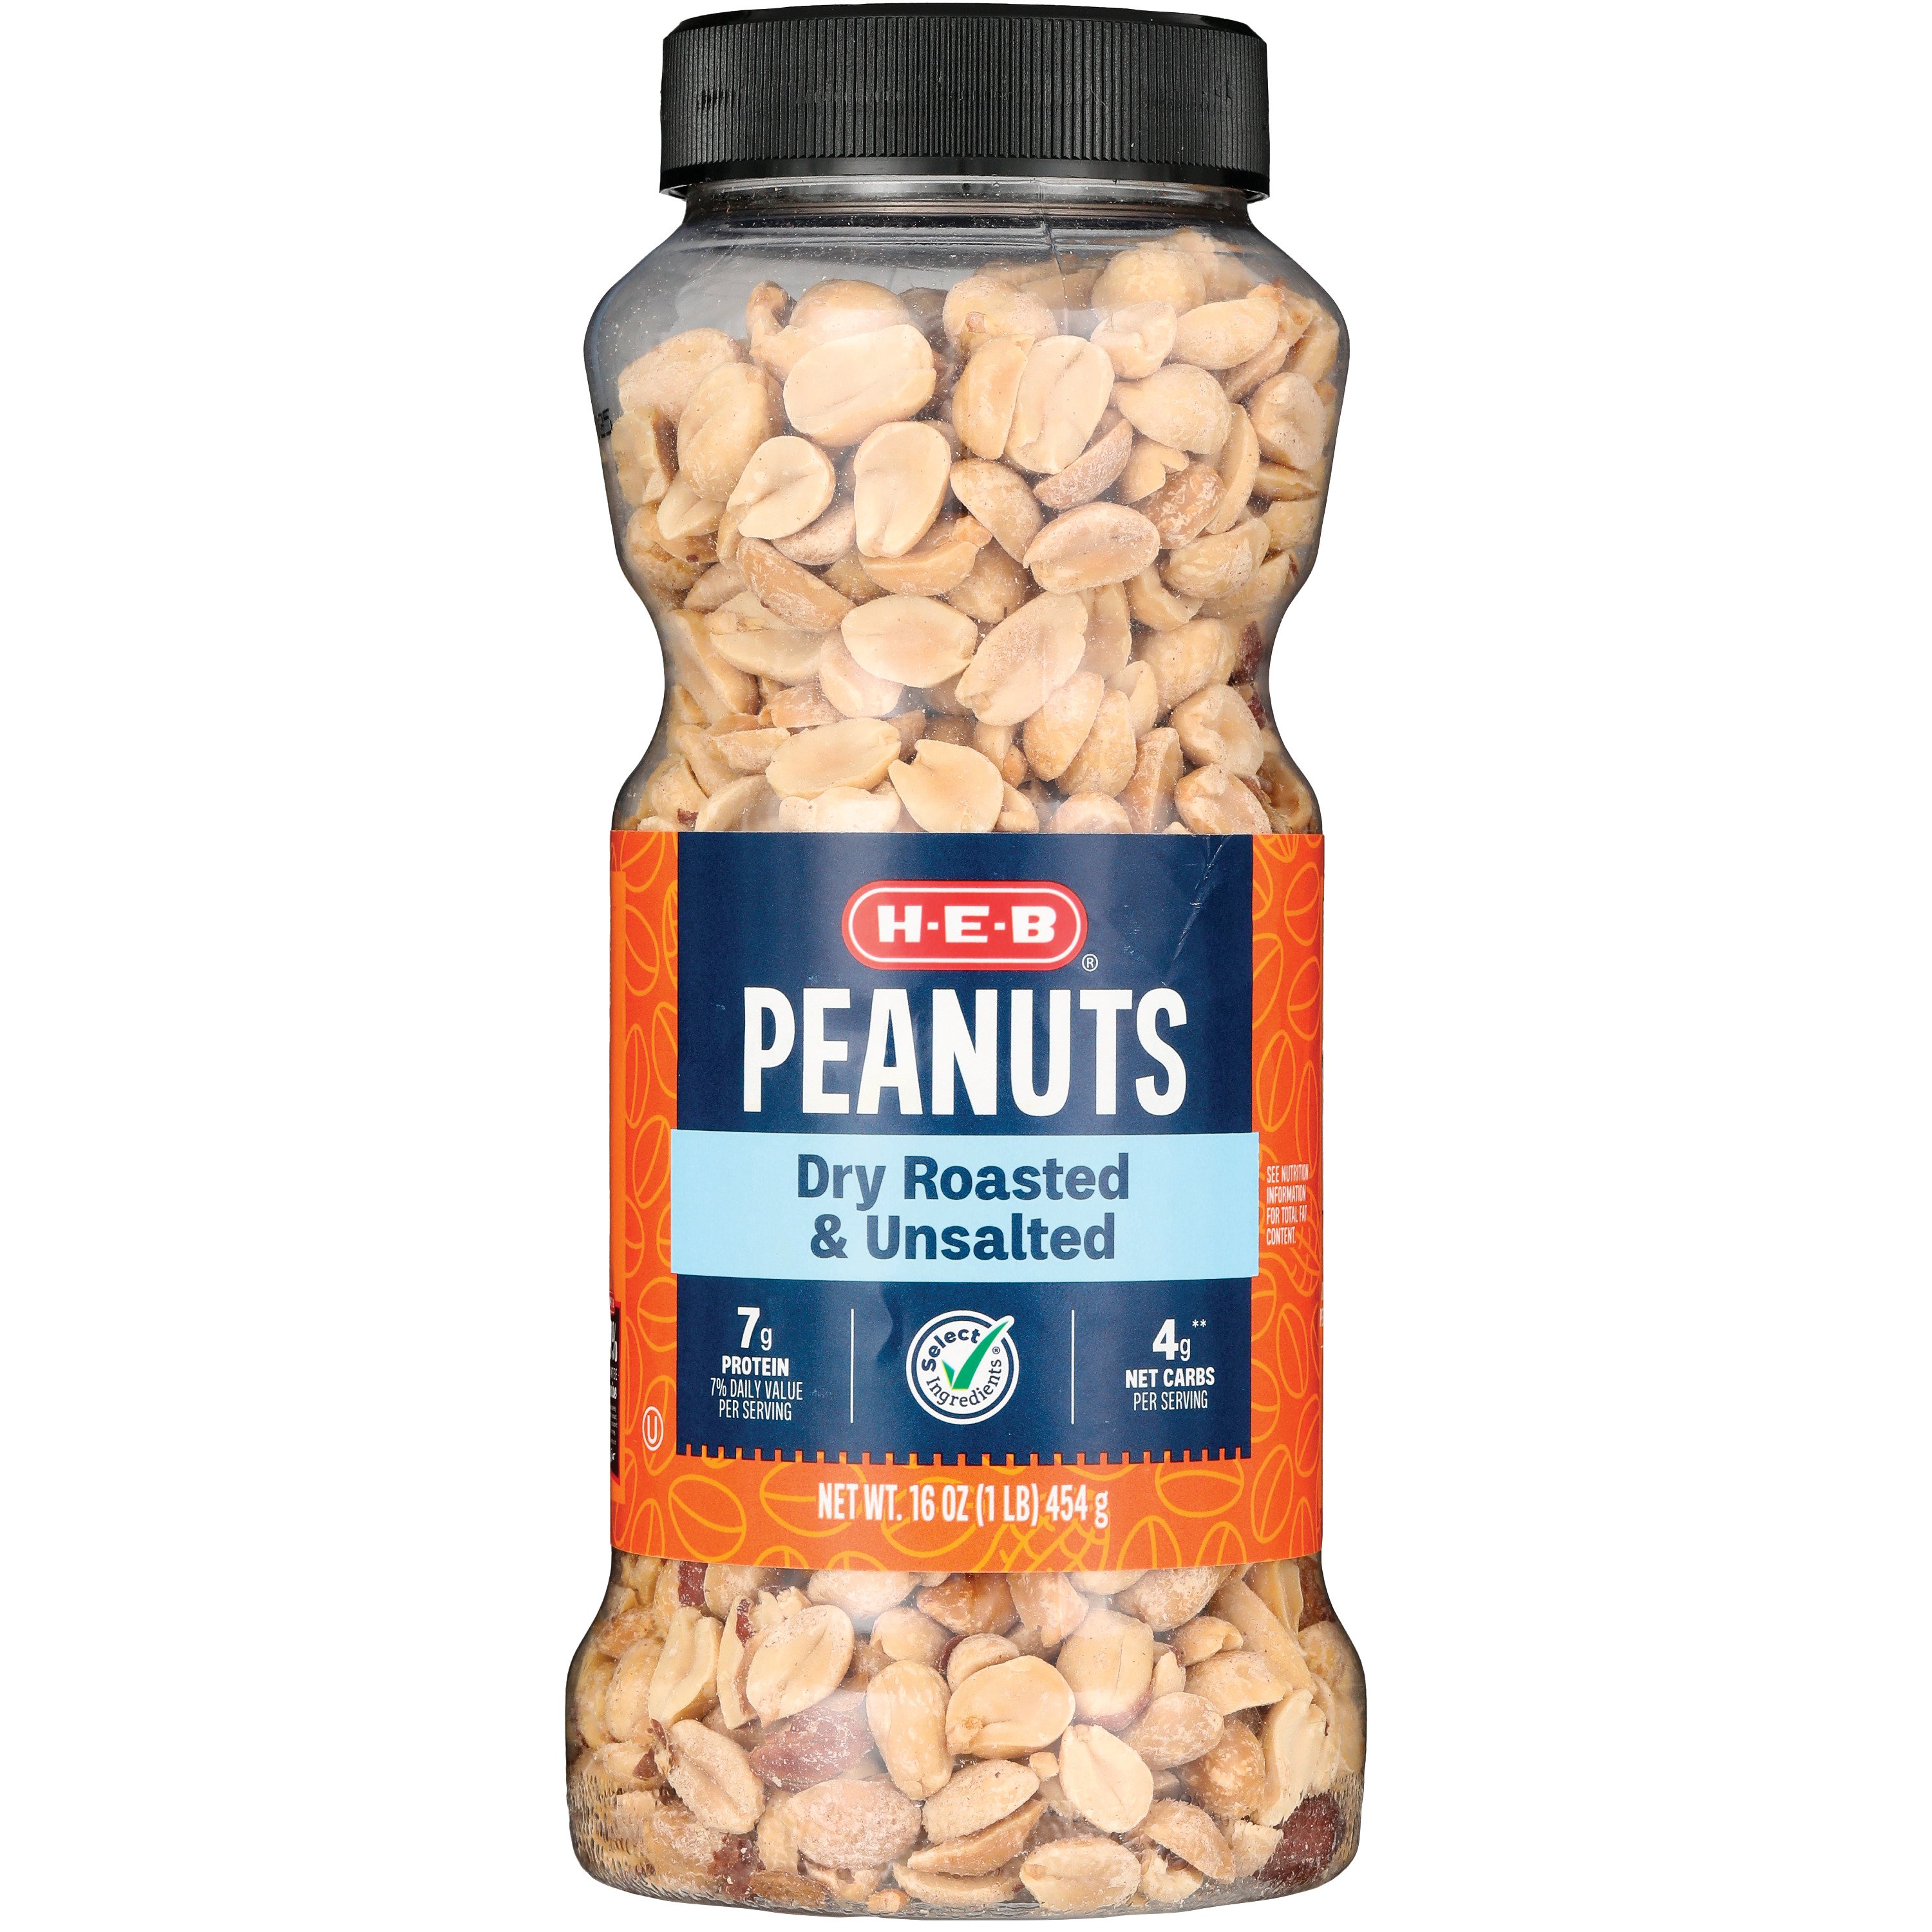 are dogs allowed dry roasted peanuts